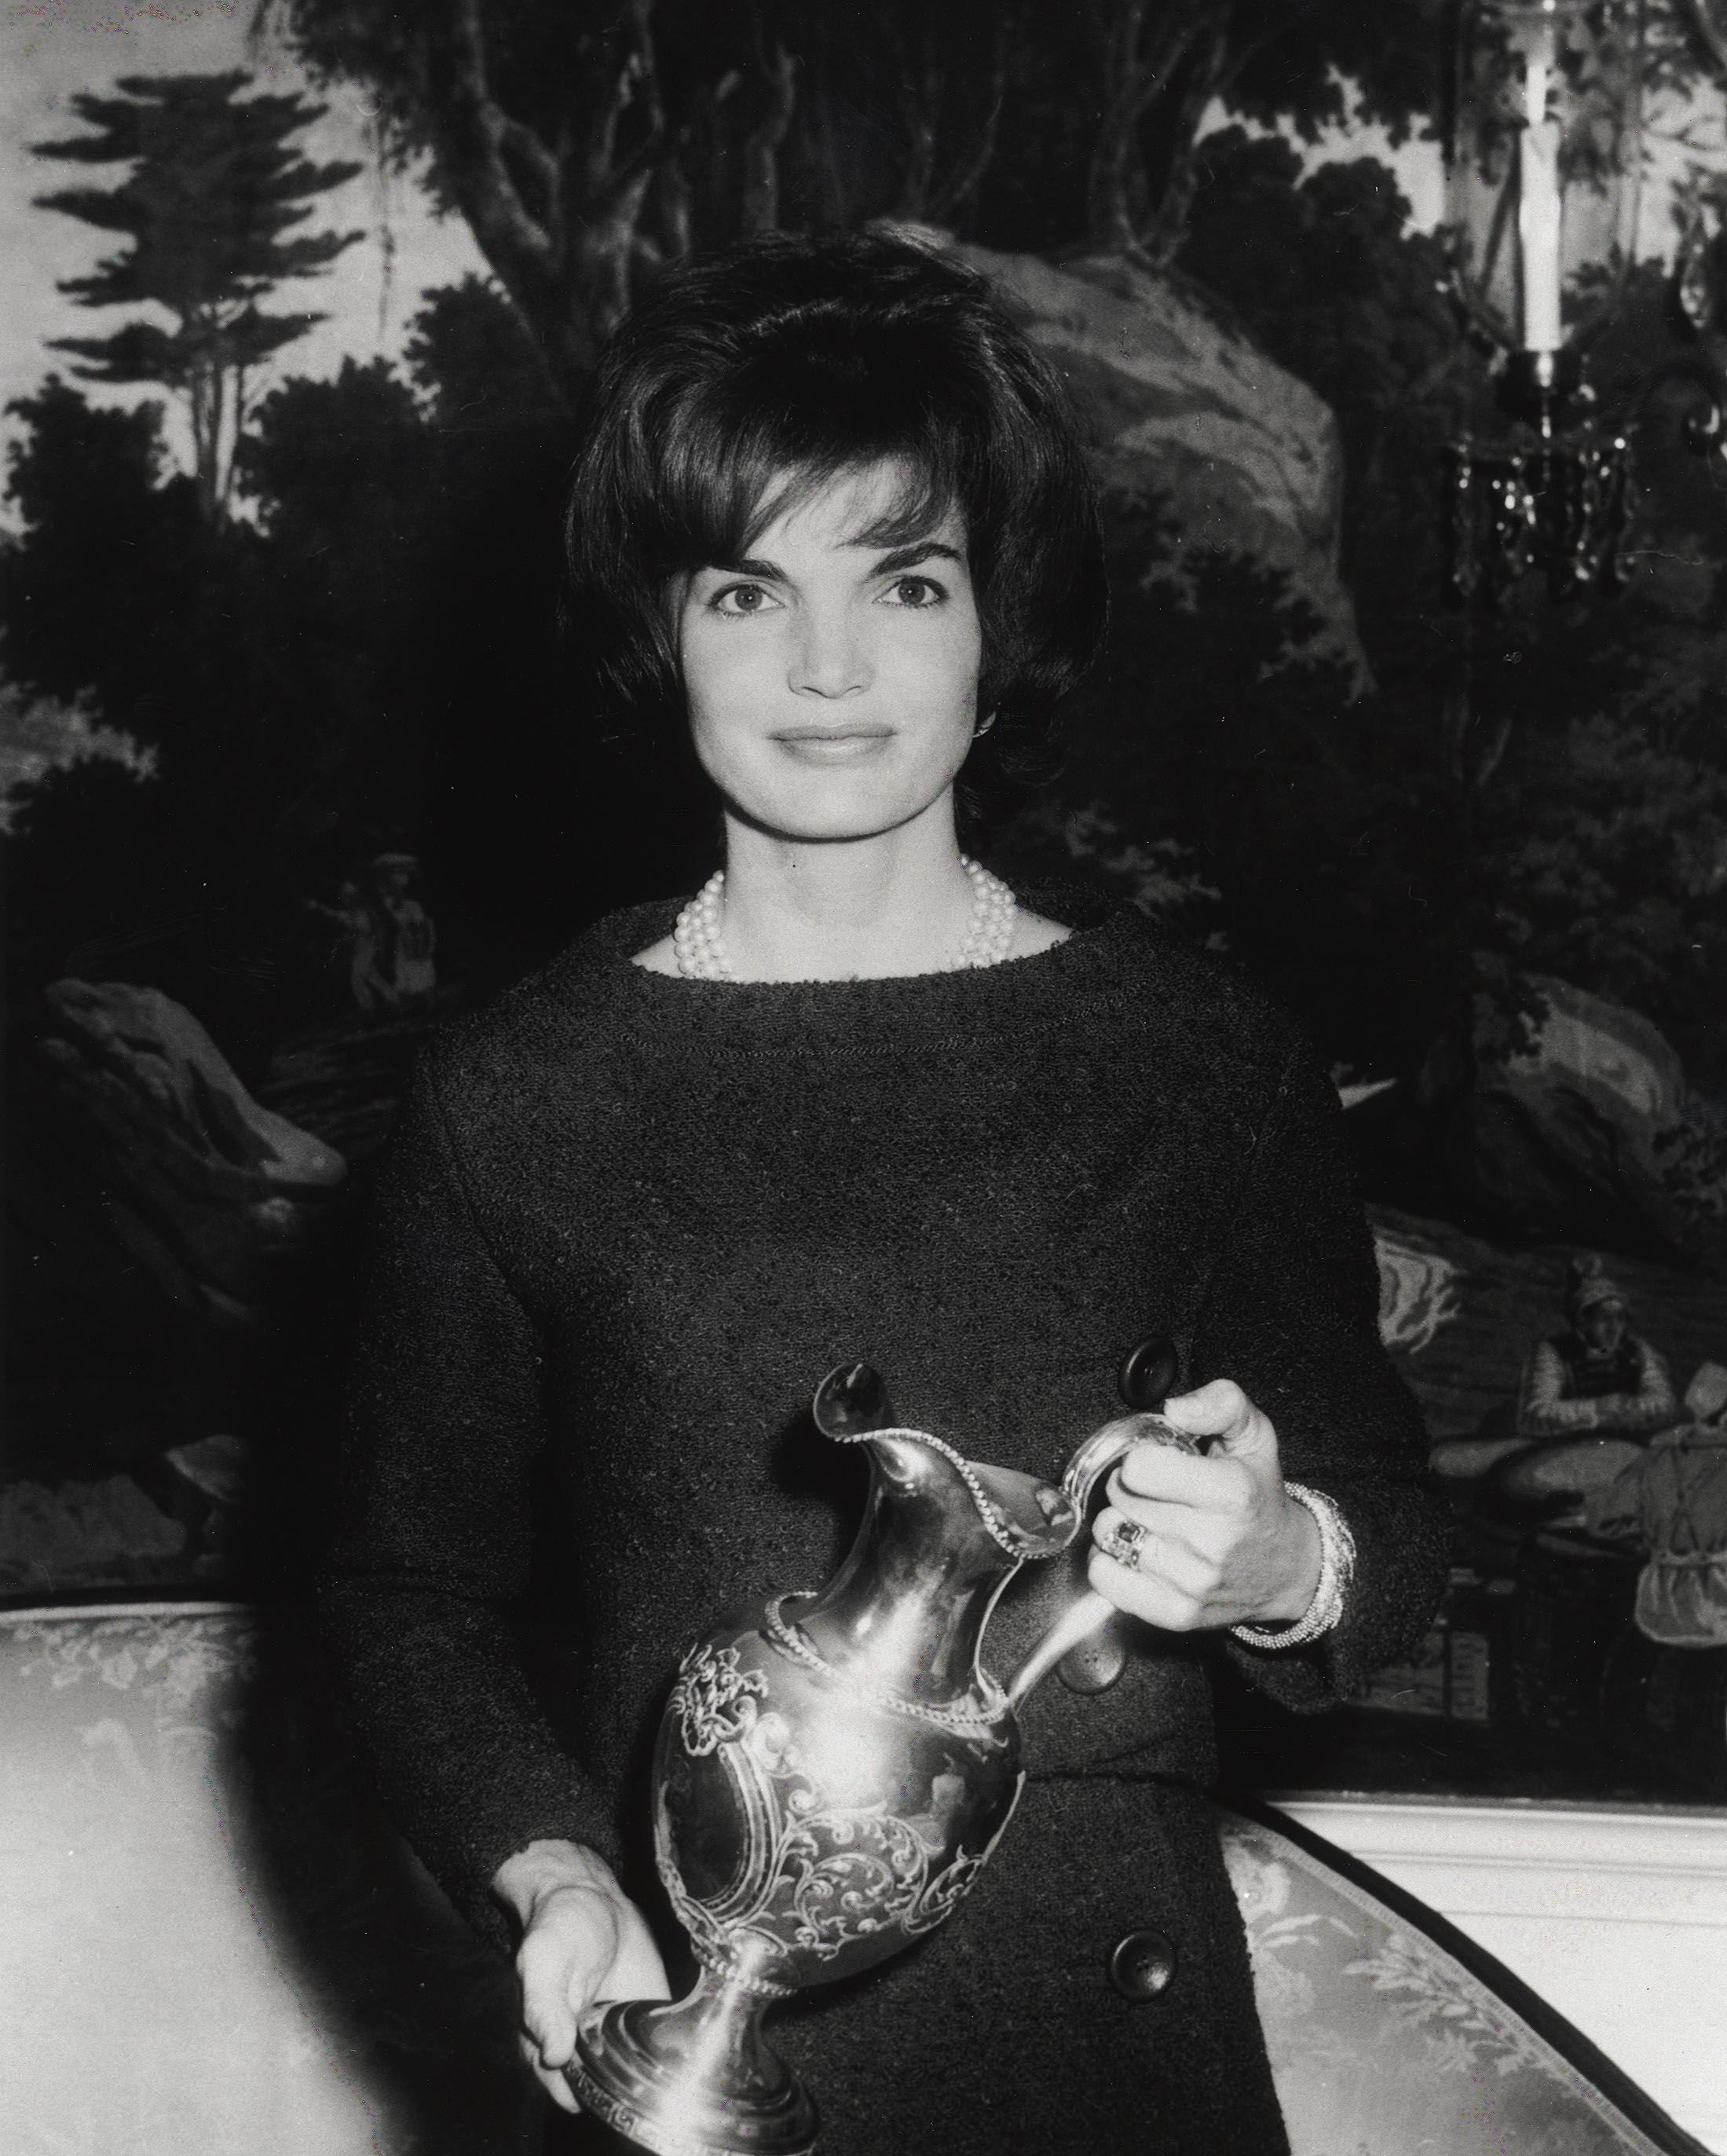 First Lady Jacqueline Kennedy poses for a photograph while holding a gift on December 12, 1961, in Washington D.C. | Photo: Kennedy Library Archives/Newsmakers/Getty Images